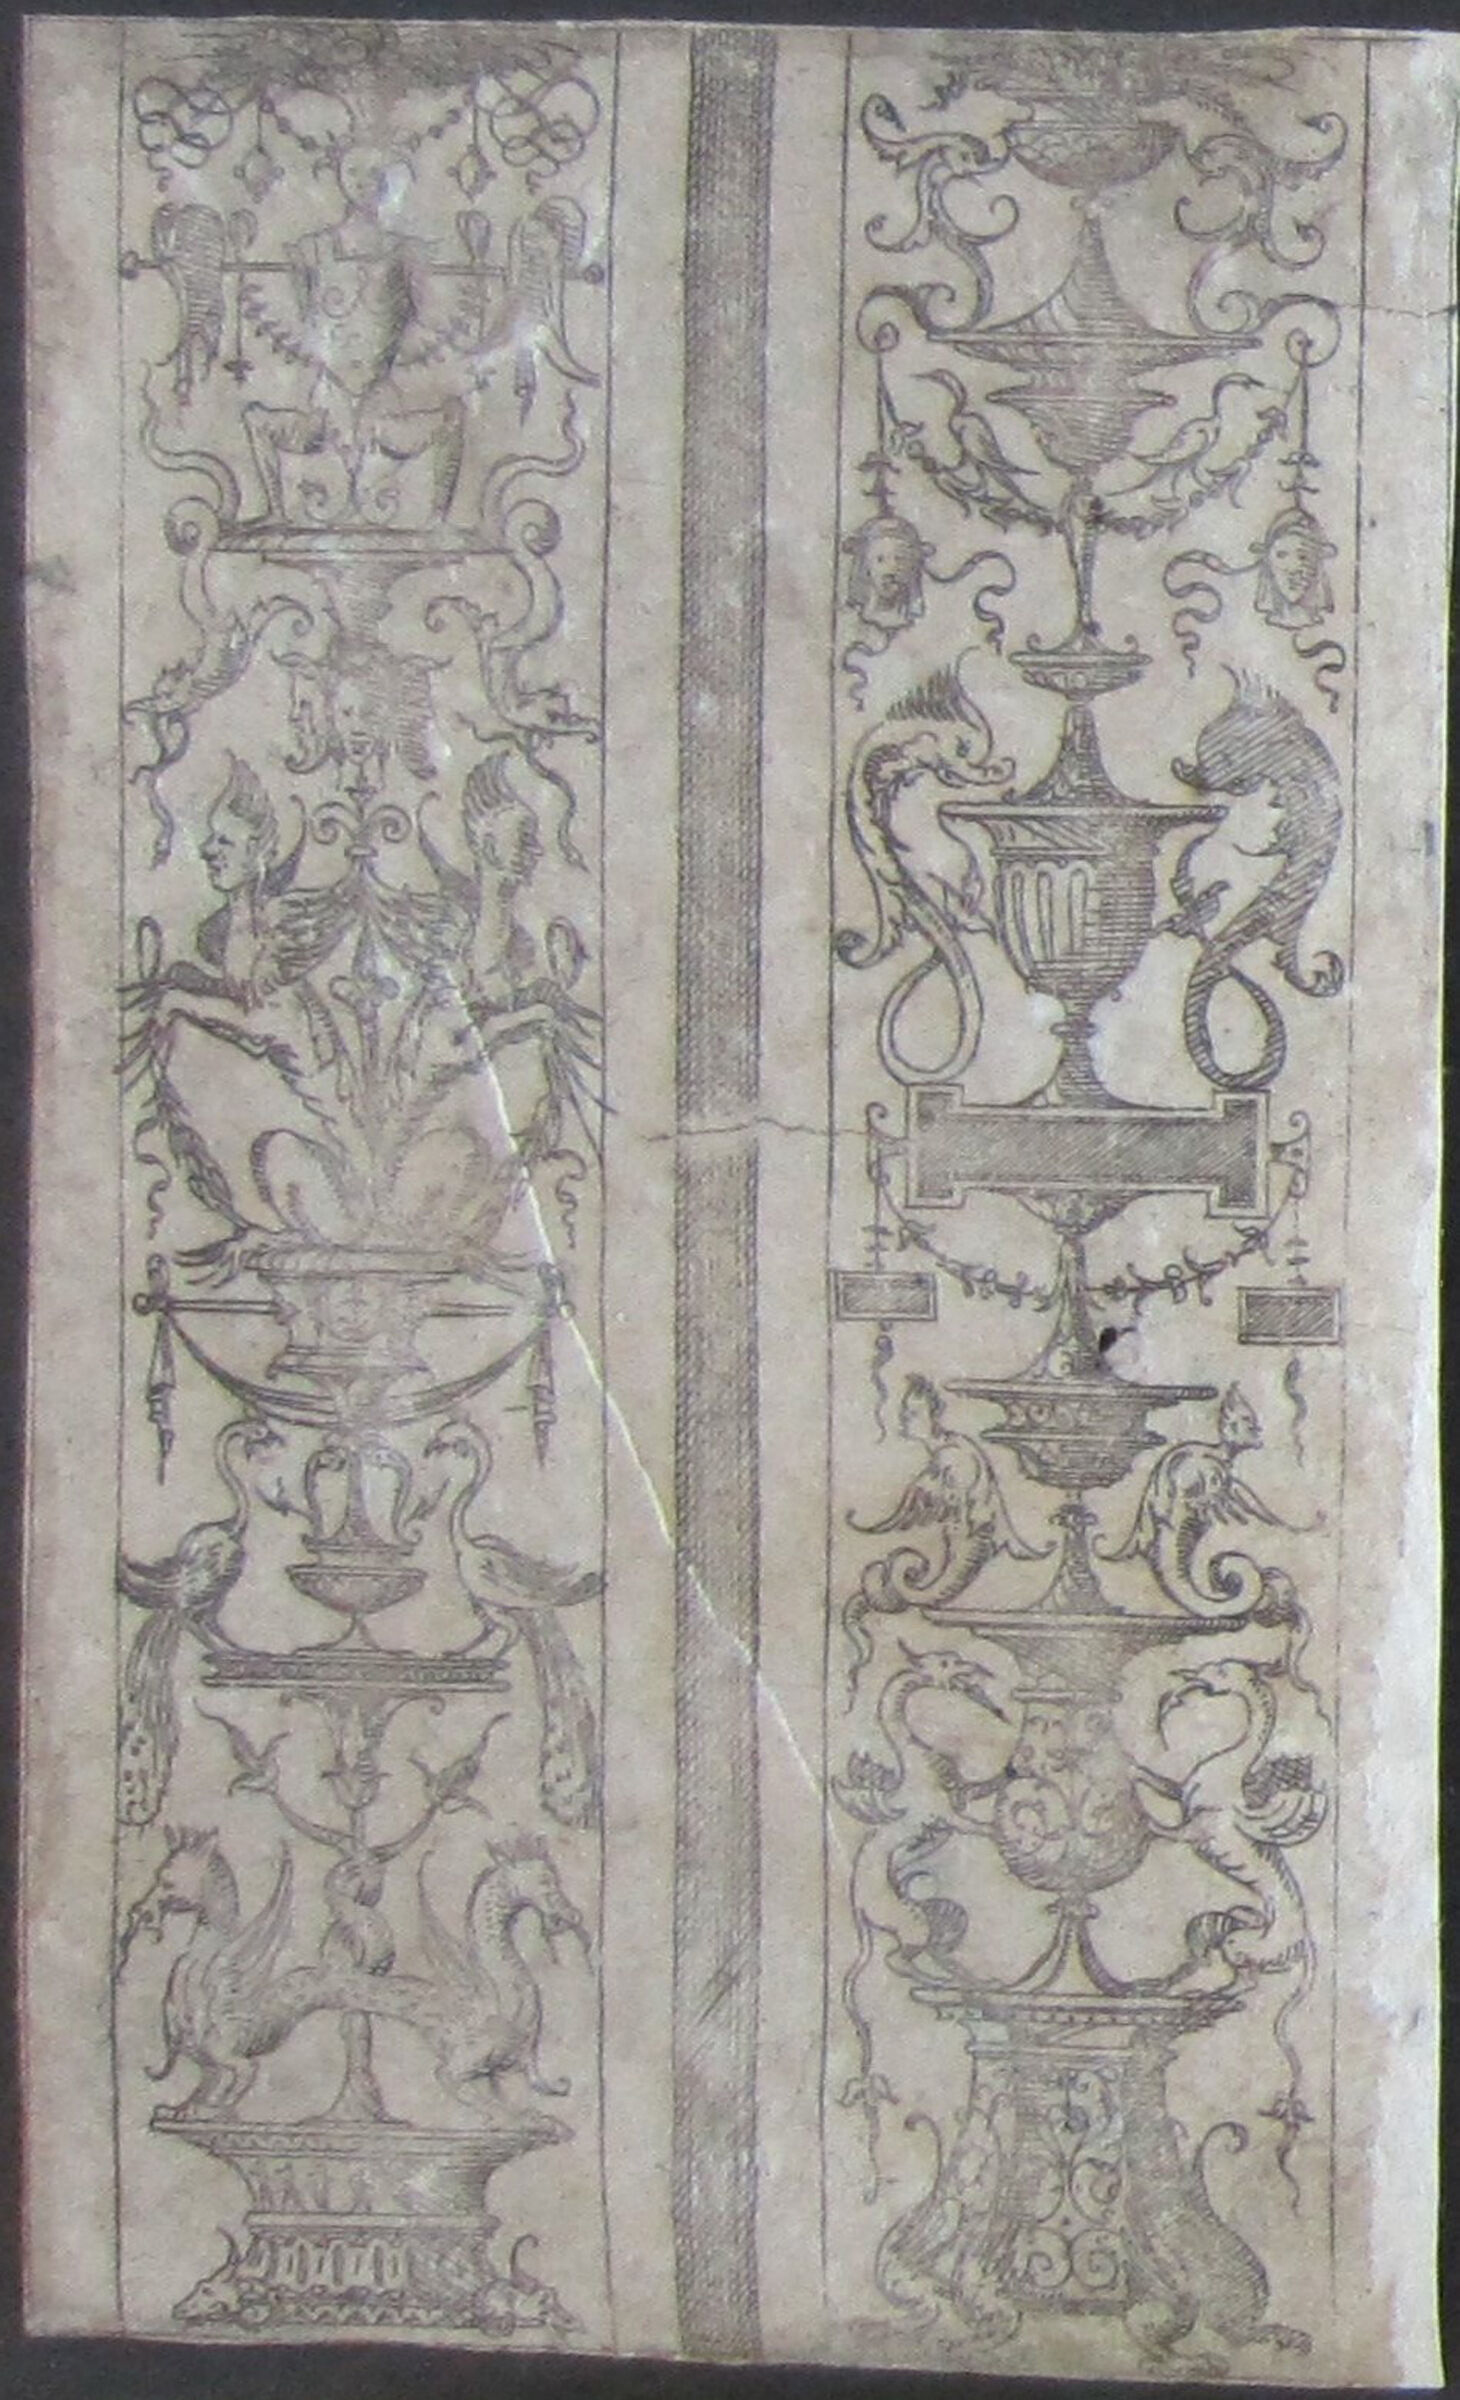 Two Grotesques Separated By A Band Of Vertical Shading, The Left Grotesque With Peacocks And Winged Monsters